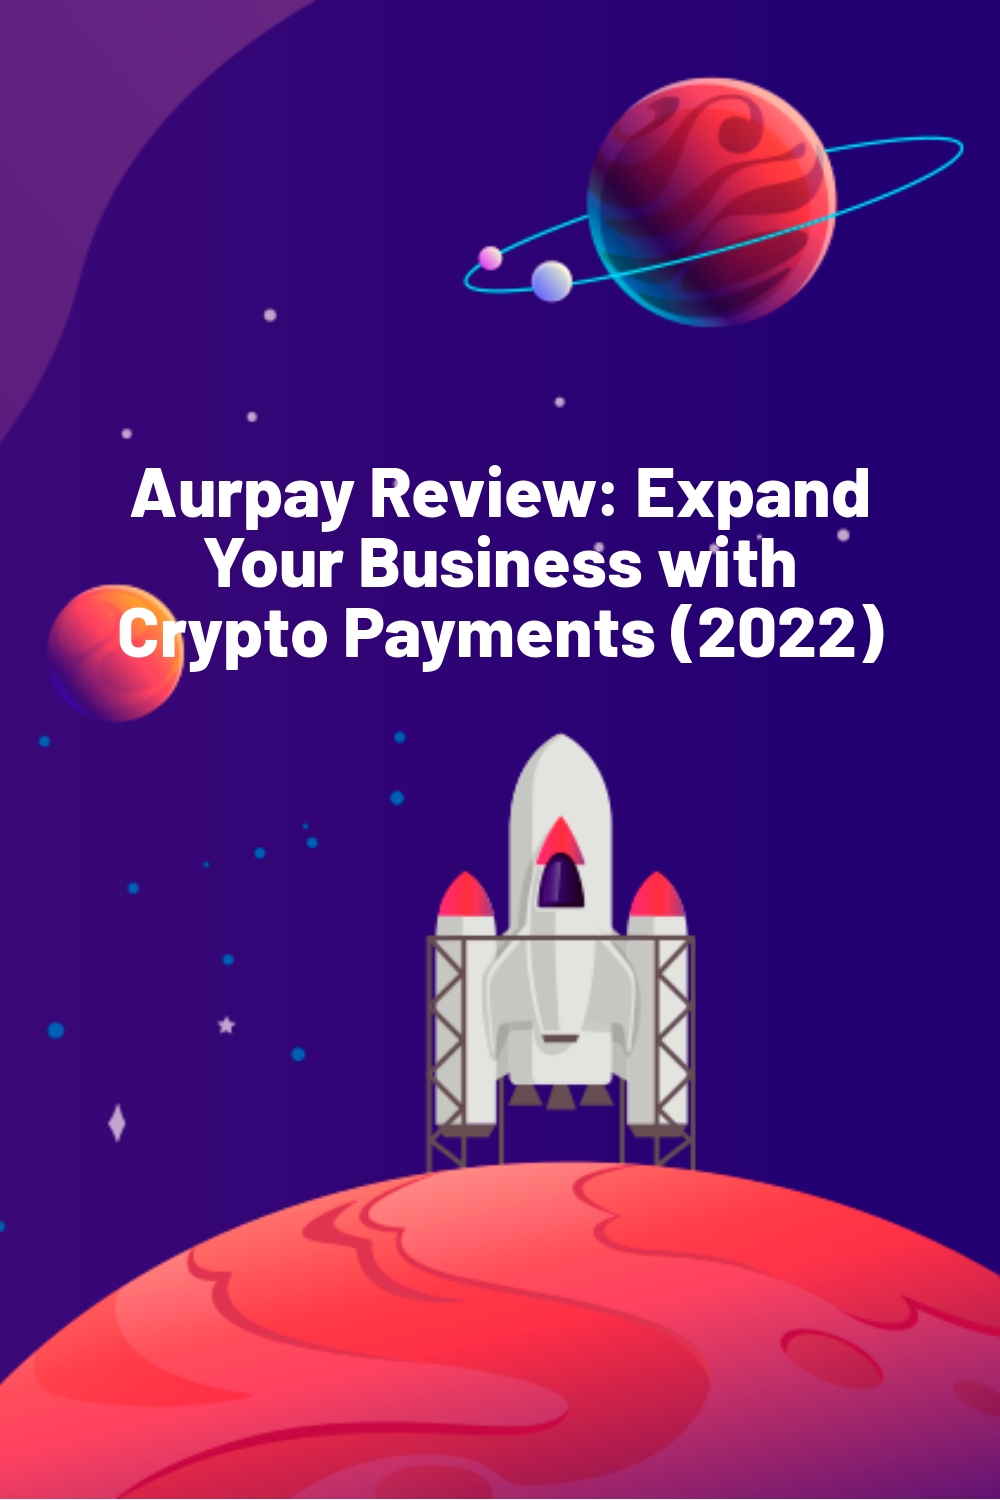 Aurpay Review: Expand Your Business with Crypto Payments (2022)